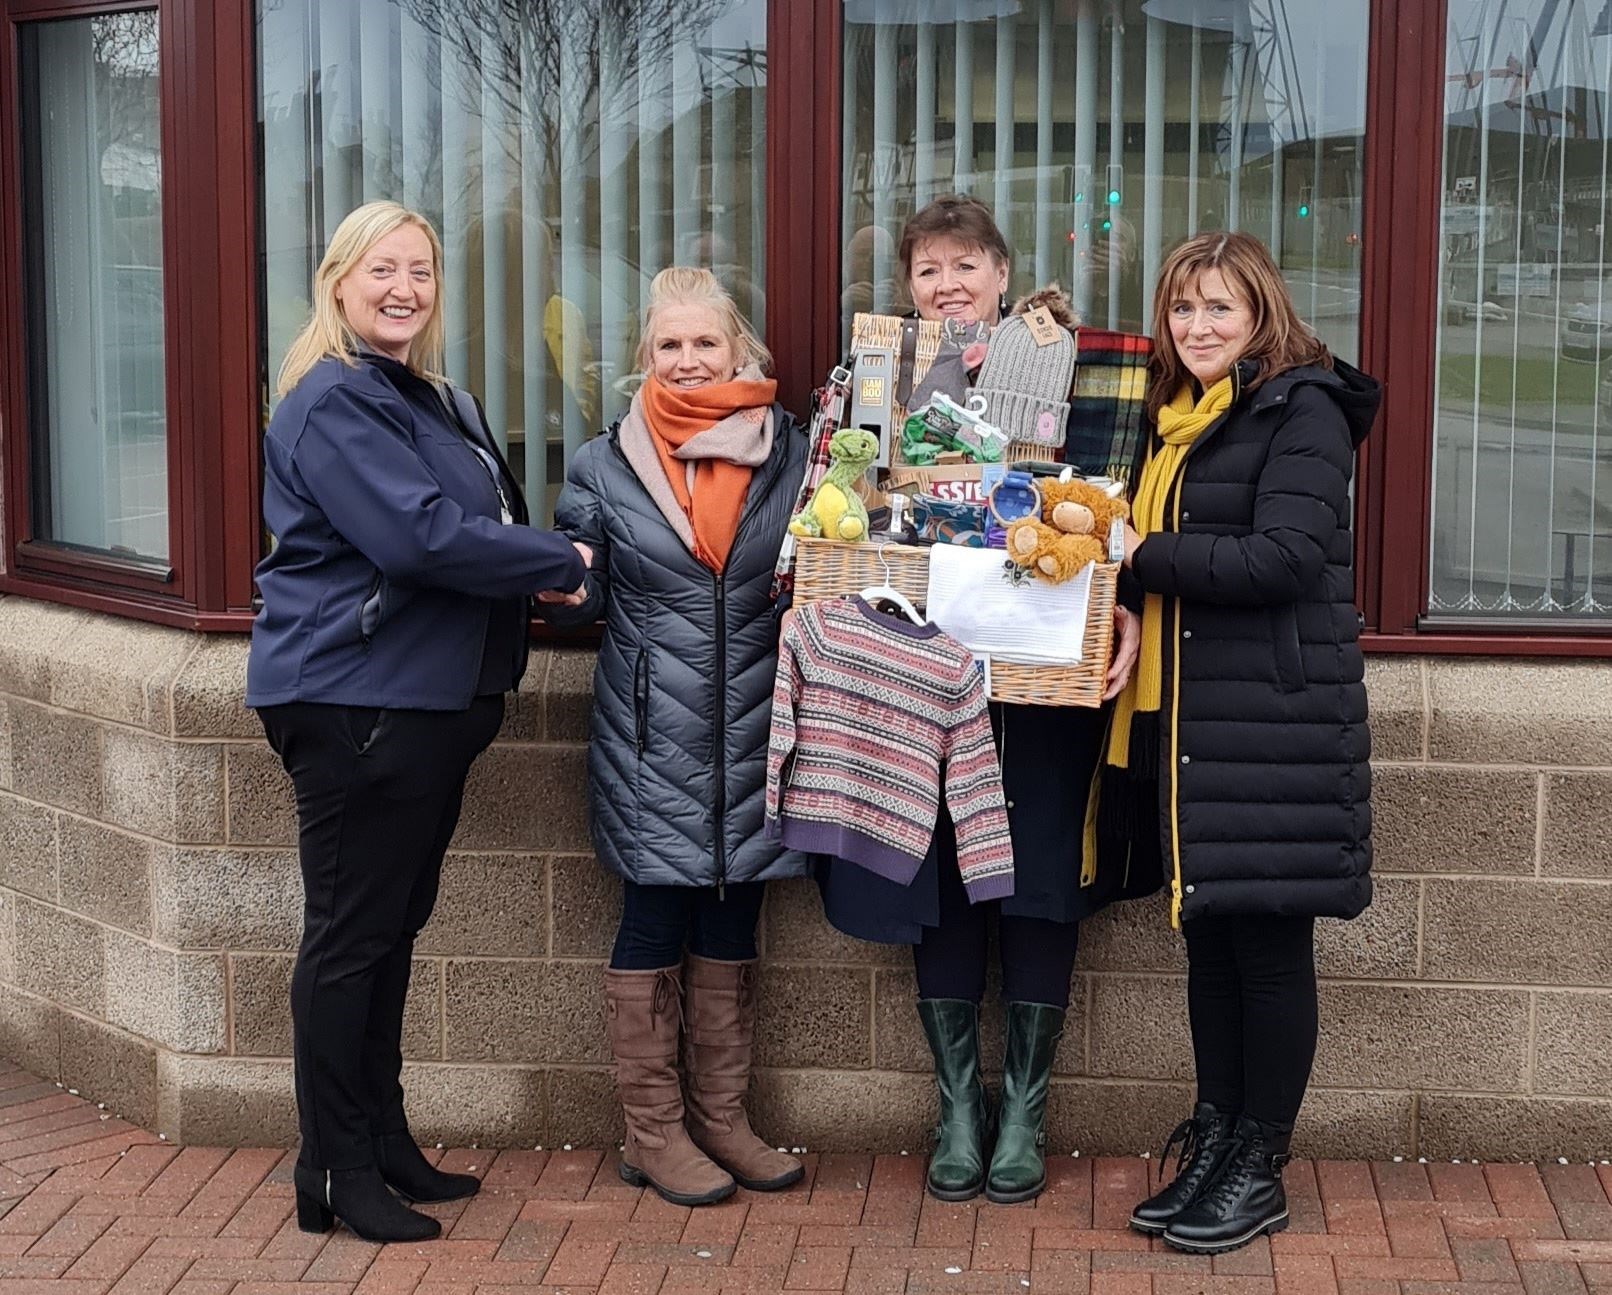 Port of Cromarty Firth cruise manager Allison McGuire (from left) with Elaine Macleod, Denise Johnstone and Jaqui Matheson, of Cobbs.